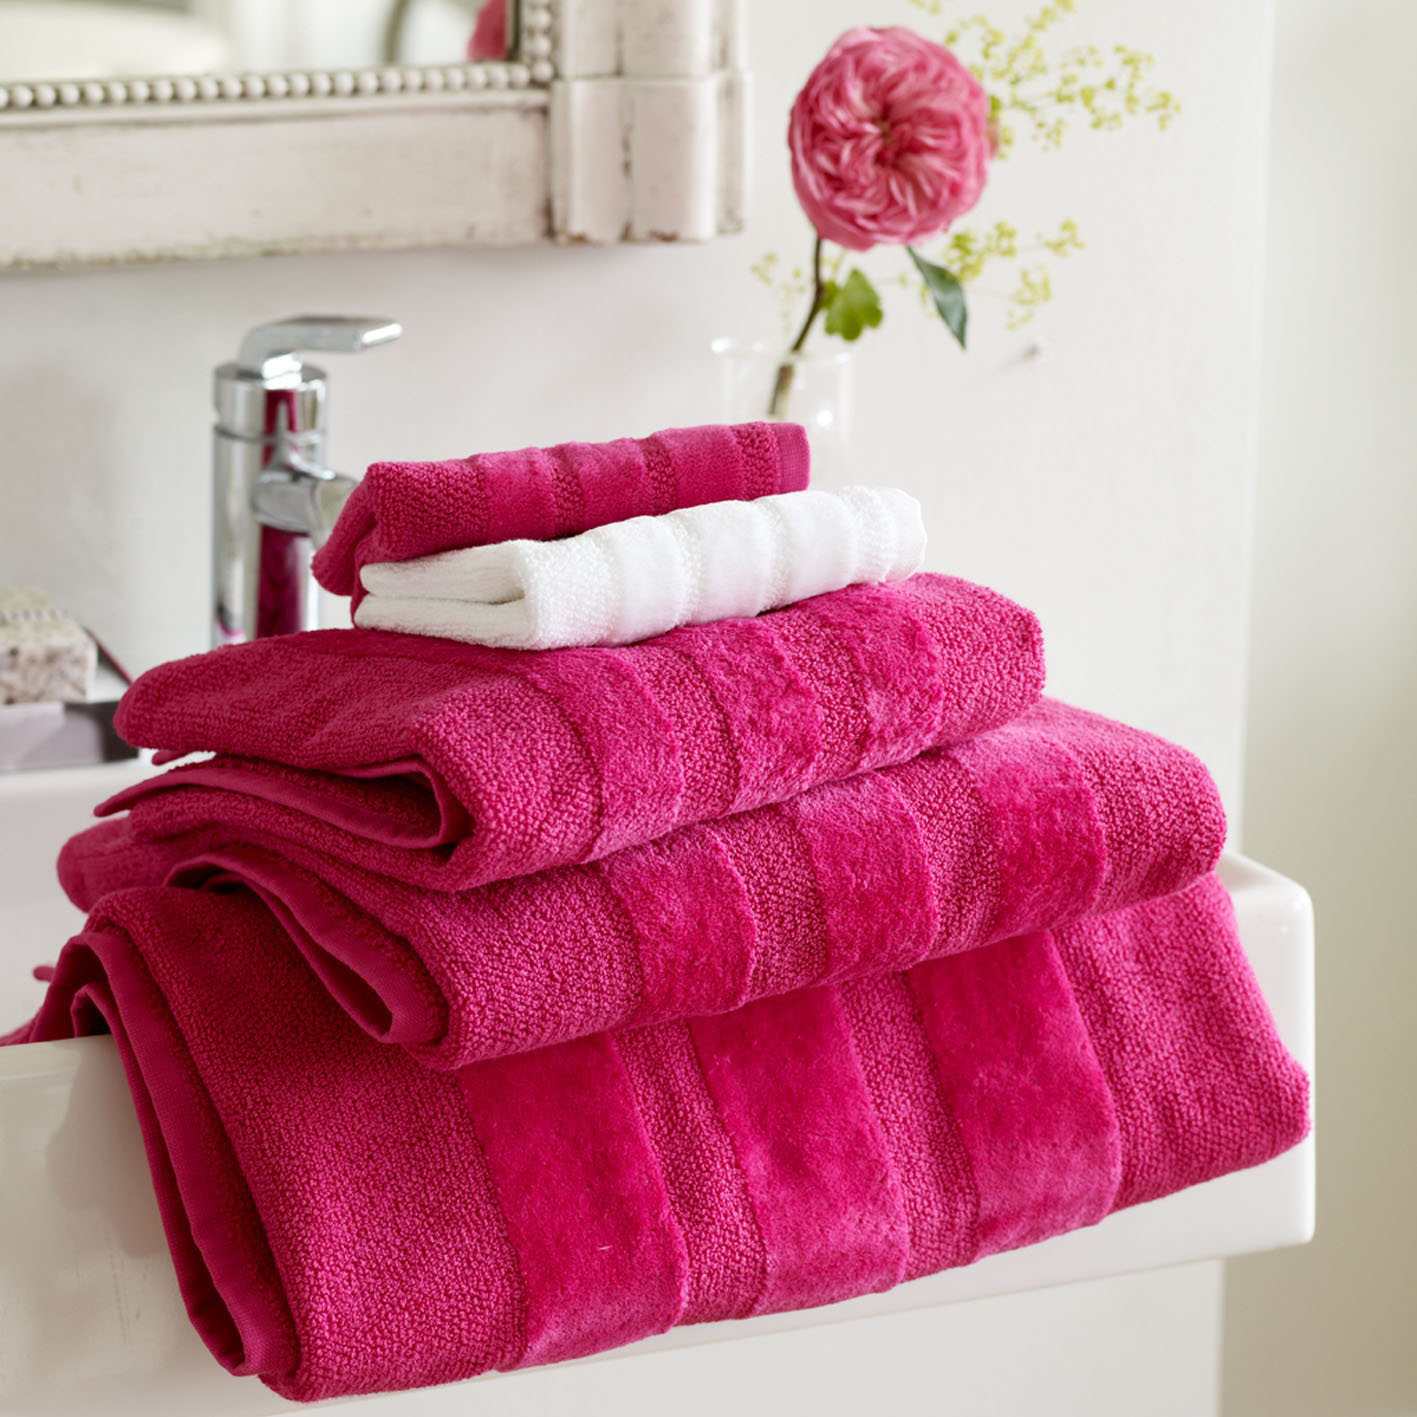 Hard Goods Towels and Robes Buying Agency in Jodhpur